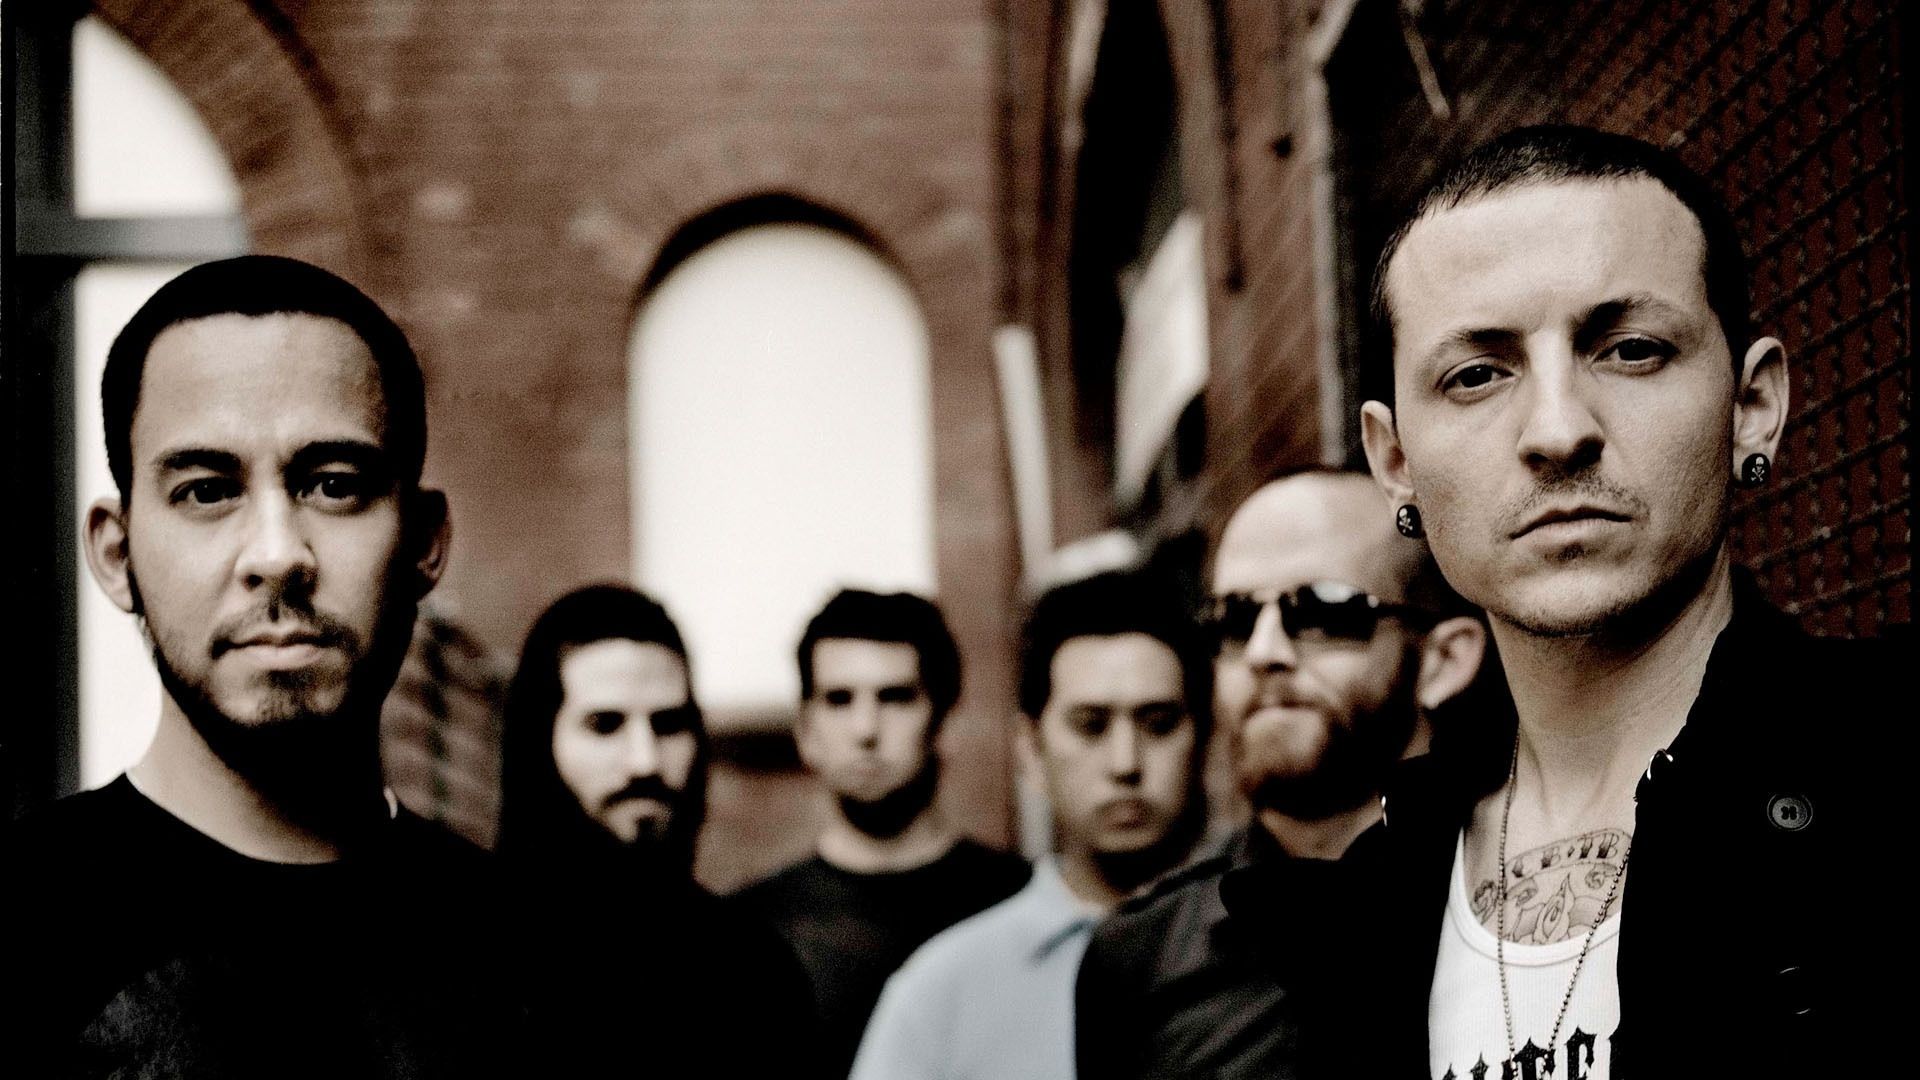 The 10 Best Linkin Park Songs You Probably Don't Know – Reality Breached